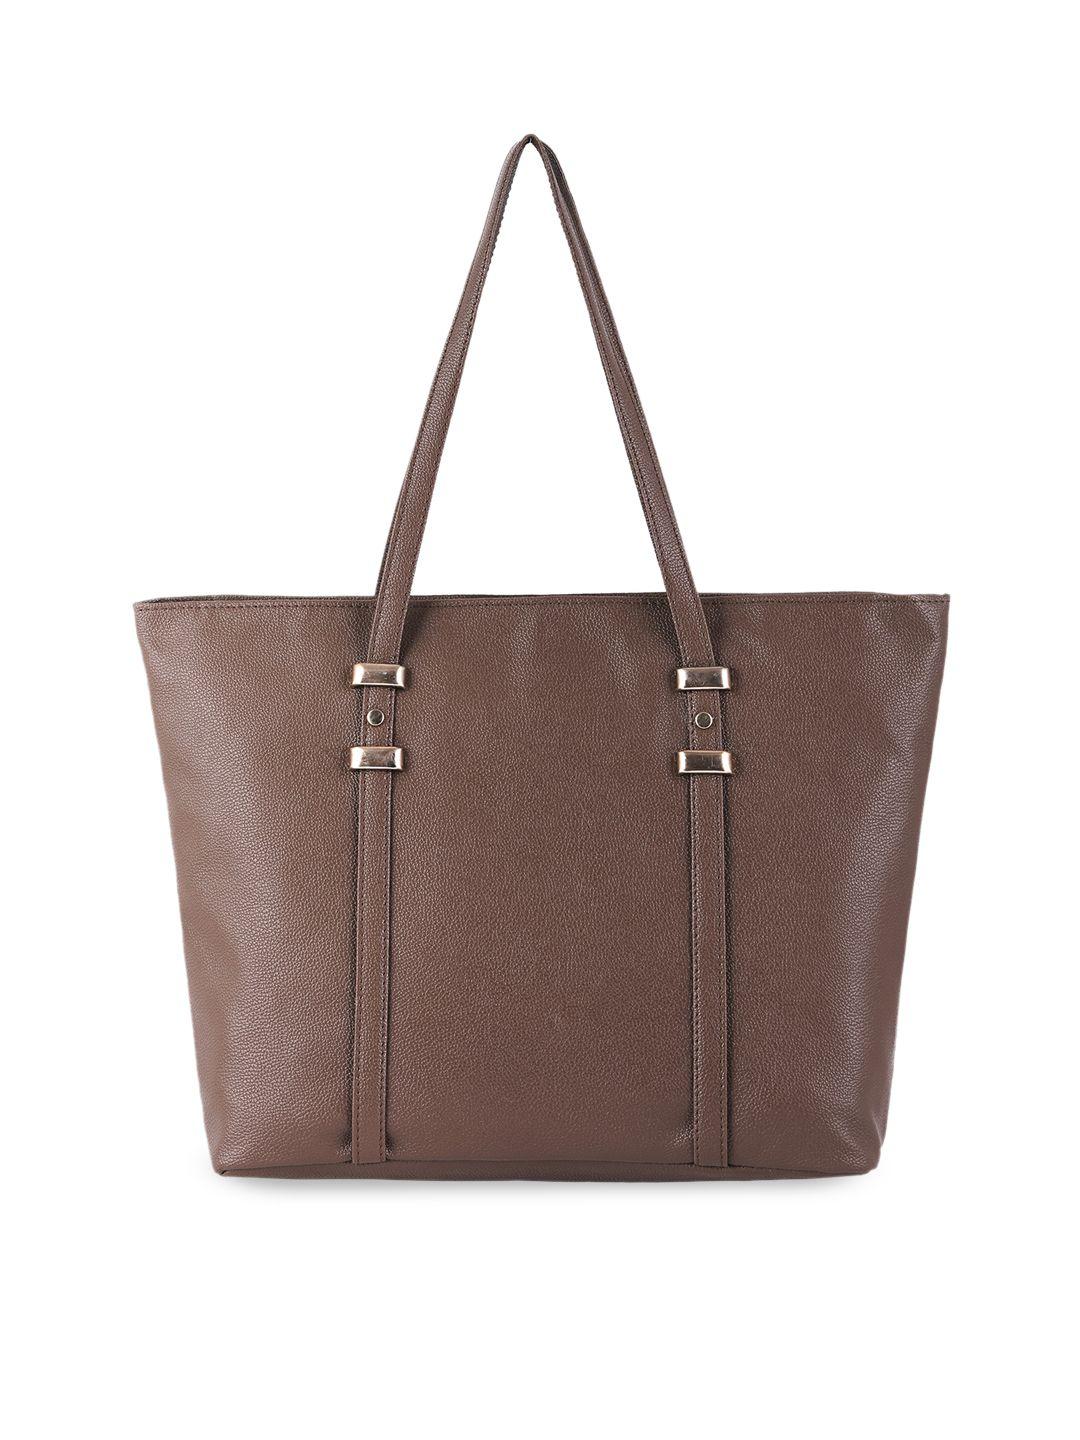 toteteca textured structured tote bag